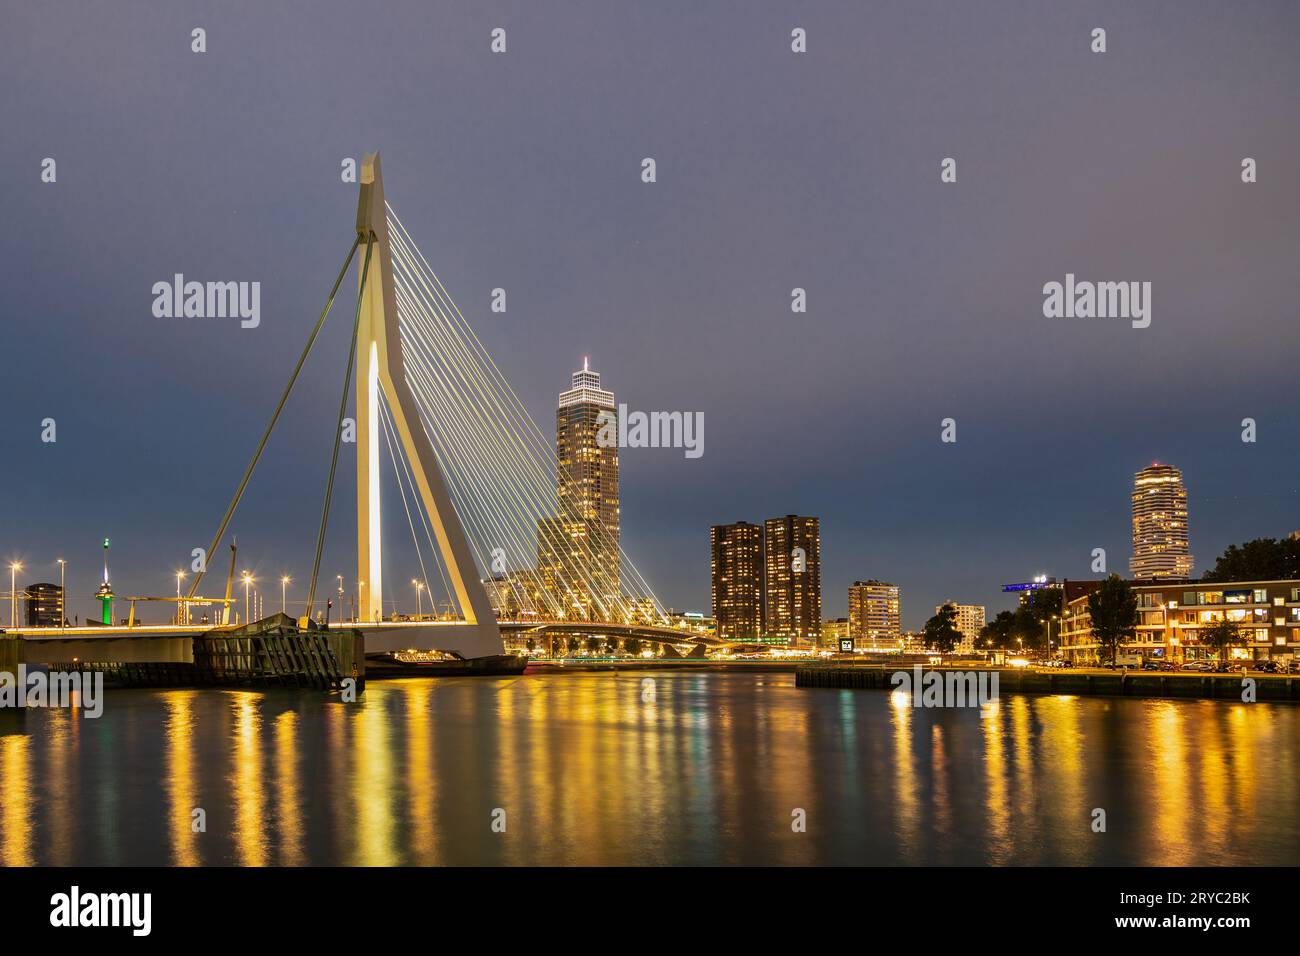 The Erasmus bridge, also know as the swan, a combined cable-stayed and bascule bridge in the centre of Rotterdam during sunset and early blue hour Stock Photo